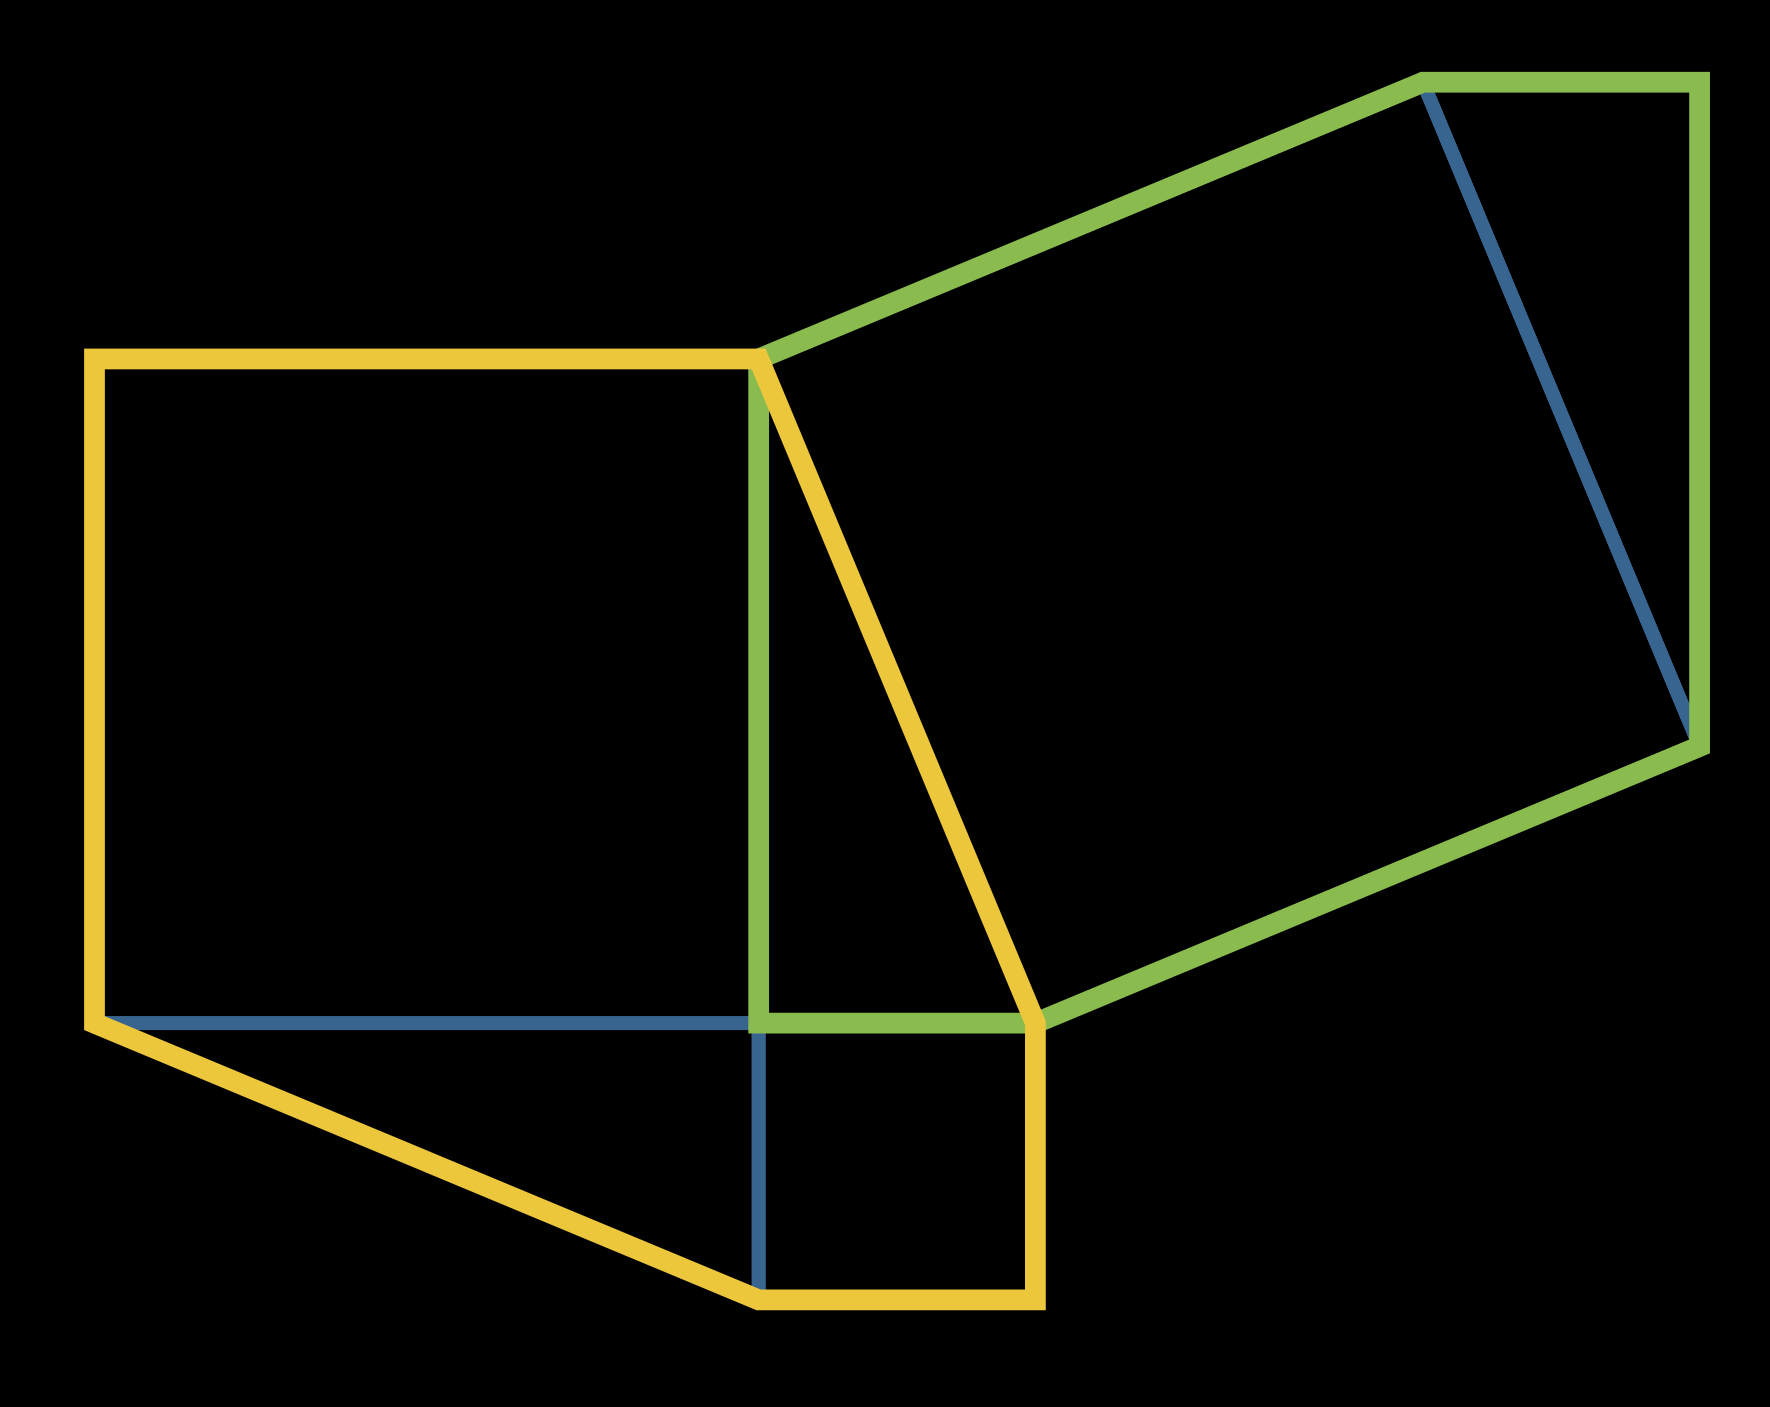 right triangle in center. squares attached to each of the three sides. copies of the original triangle added on the opposite side of the hypotenuse square and also in between the other two squares. The largest square and the two adjoining triangles make a six-sided figure that is highlighted green. The original triangle, two smaller squares, and the other new triangle form a second six sided figure highlighted yellow